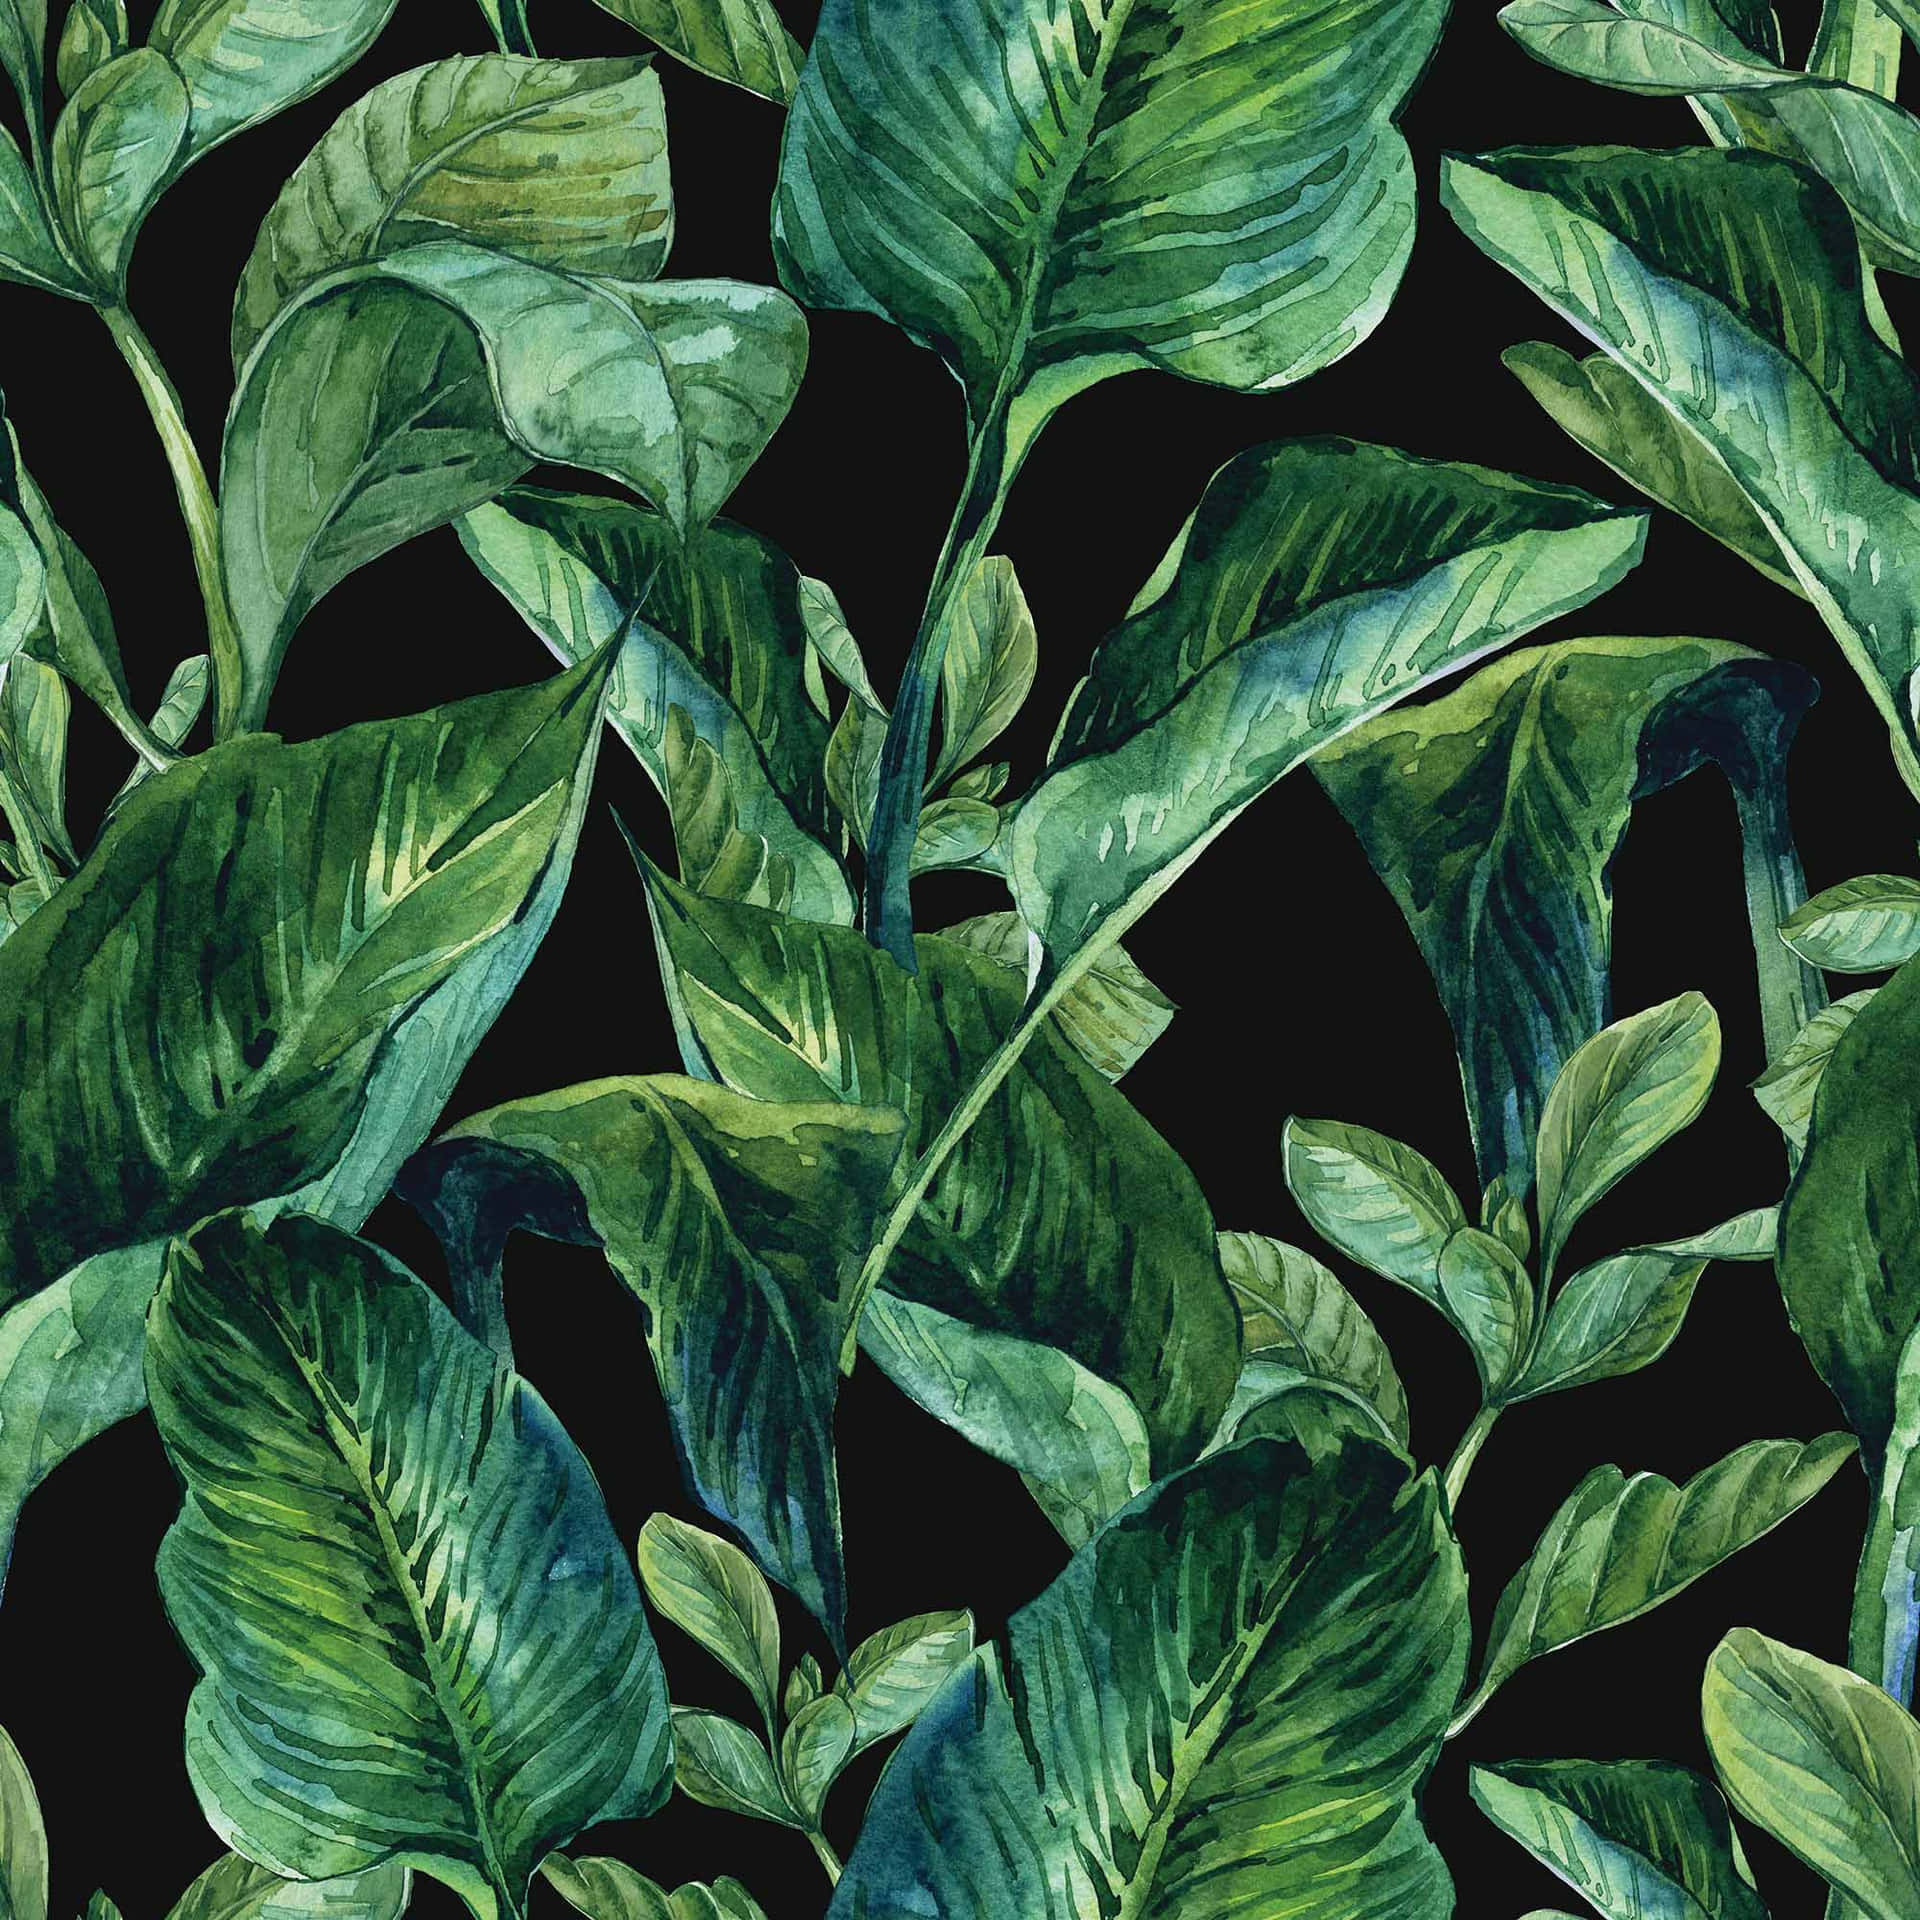 A Watercolor Pattern Of Green Leaves On A Black Background